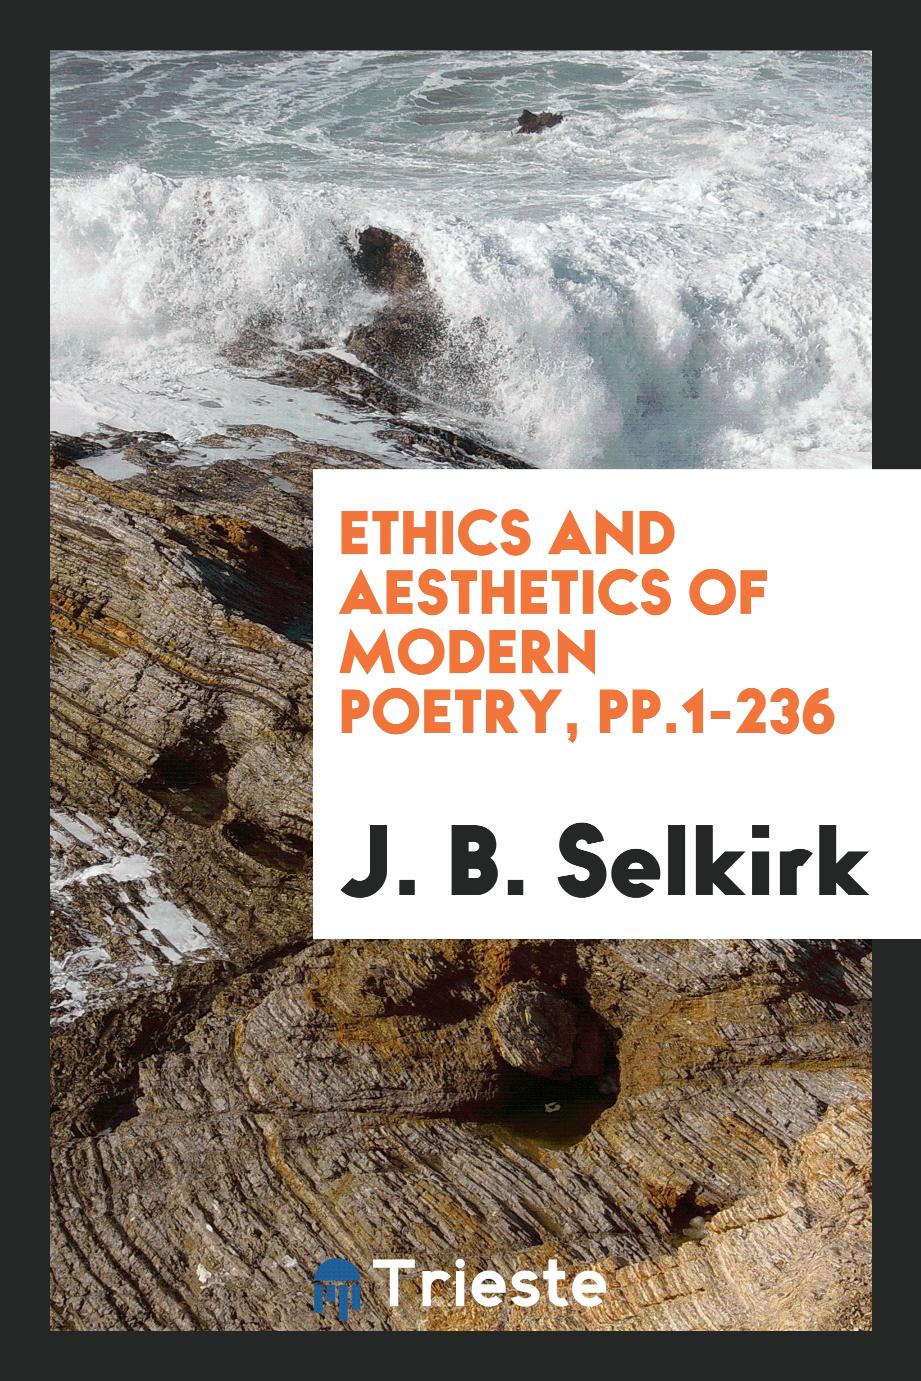 Ethics and Aesthetics of Modern Poetry, pp.1-236